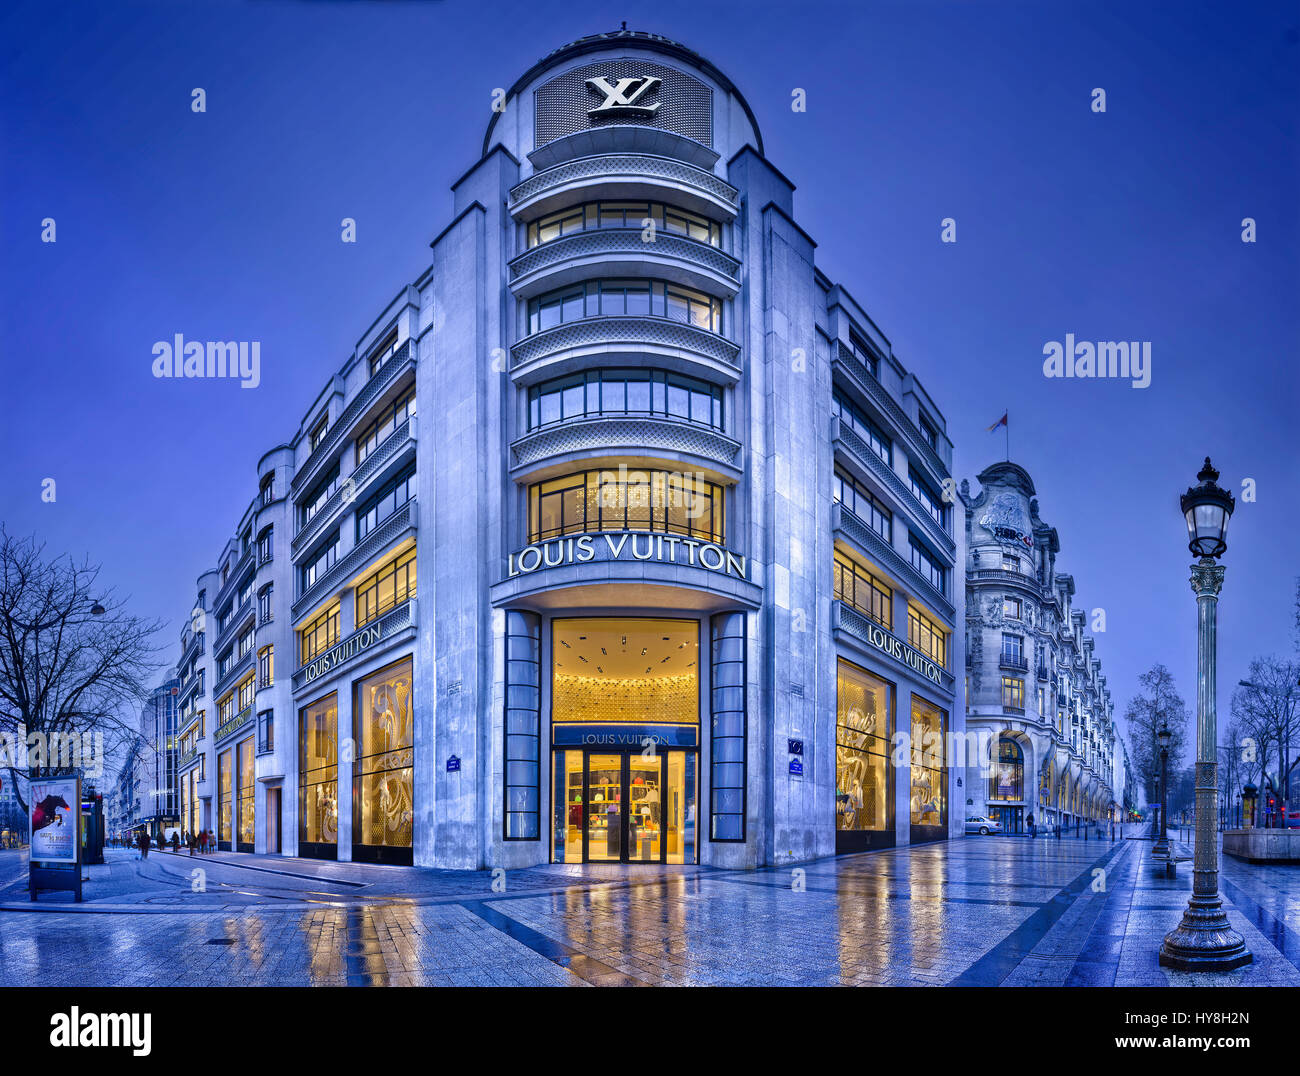 The Louis Vuitton retail store on the Champs Elysees in Paris Stock Photo, Royalty Free Image ...